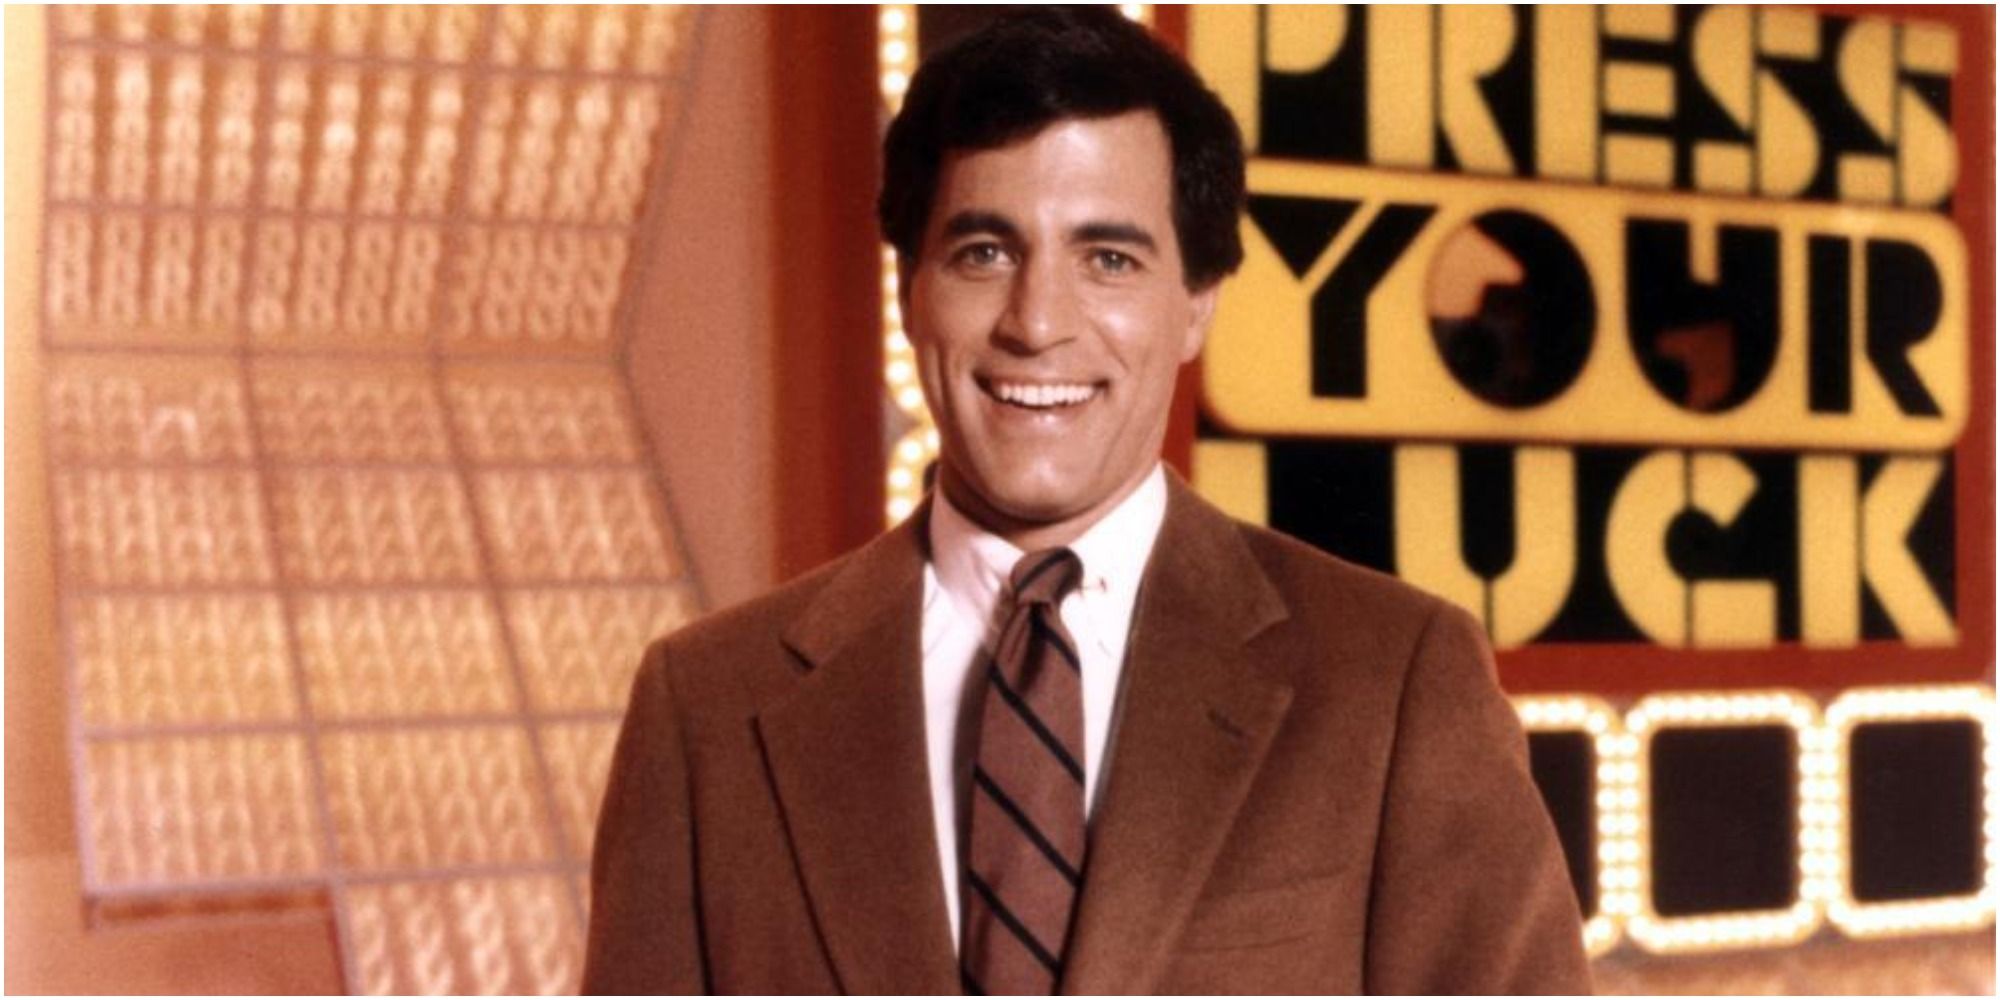 Peter Tomarken smiles as he hosts the '80s game show Press Your Luck.